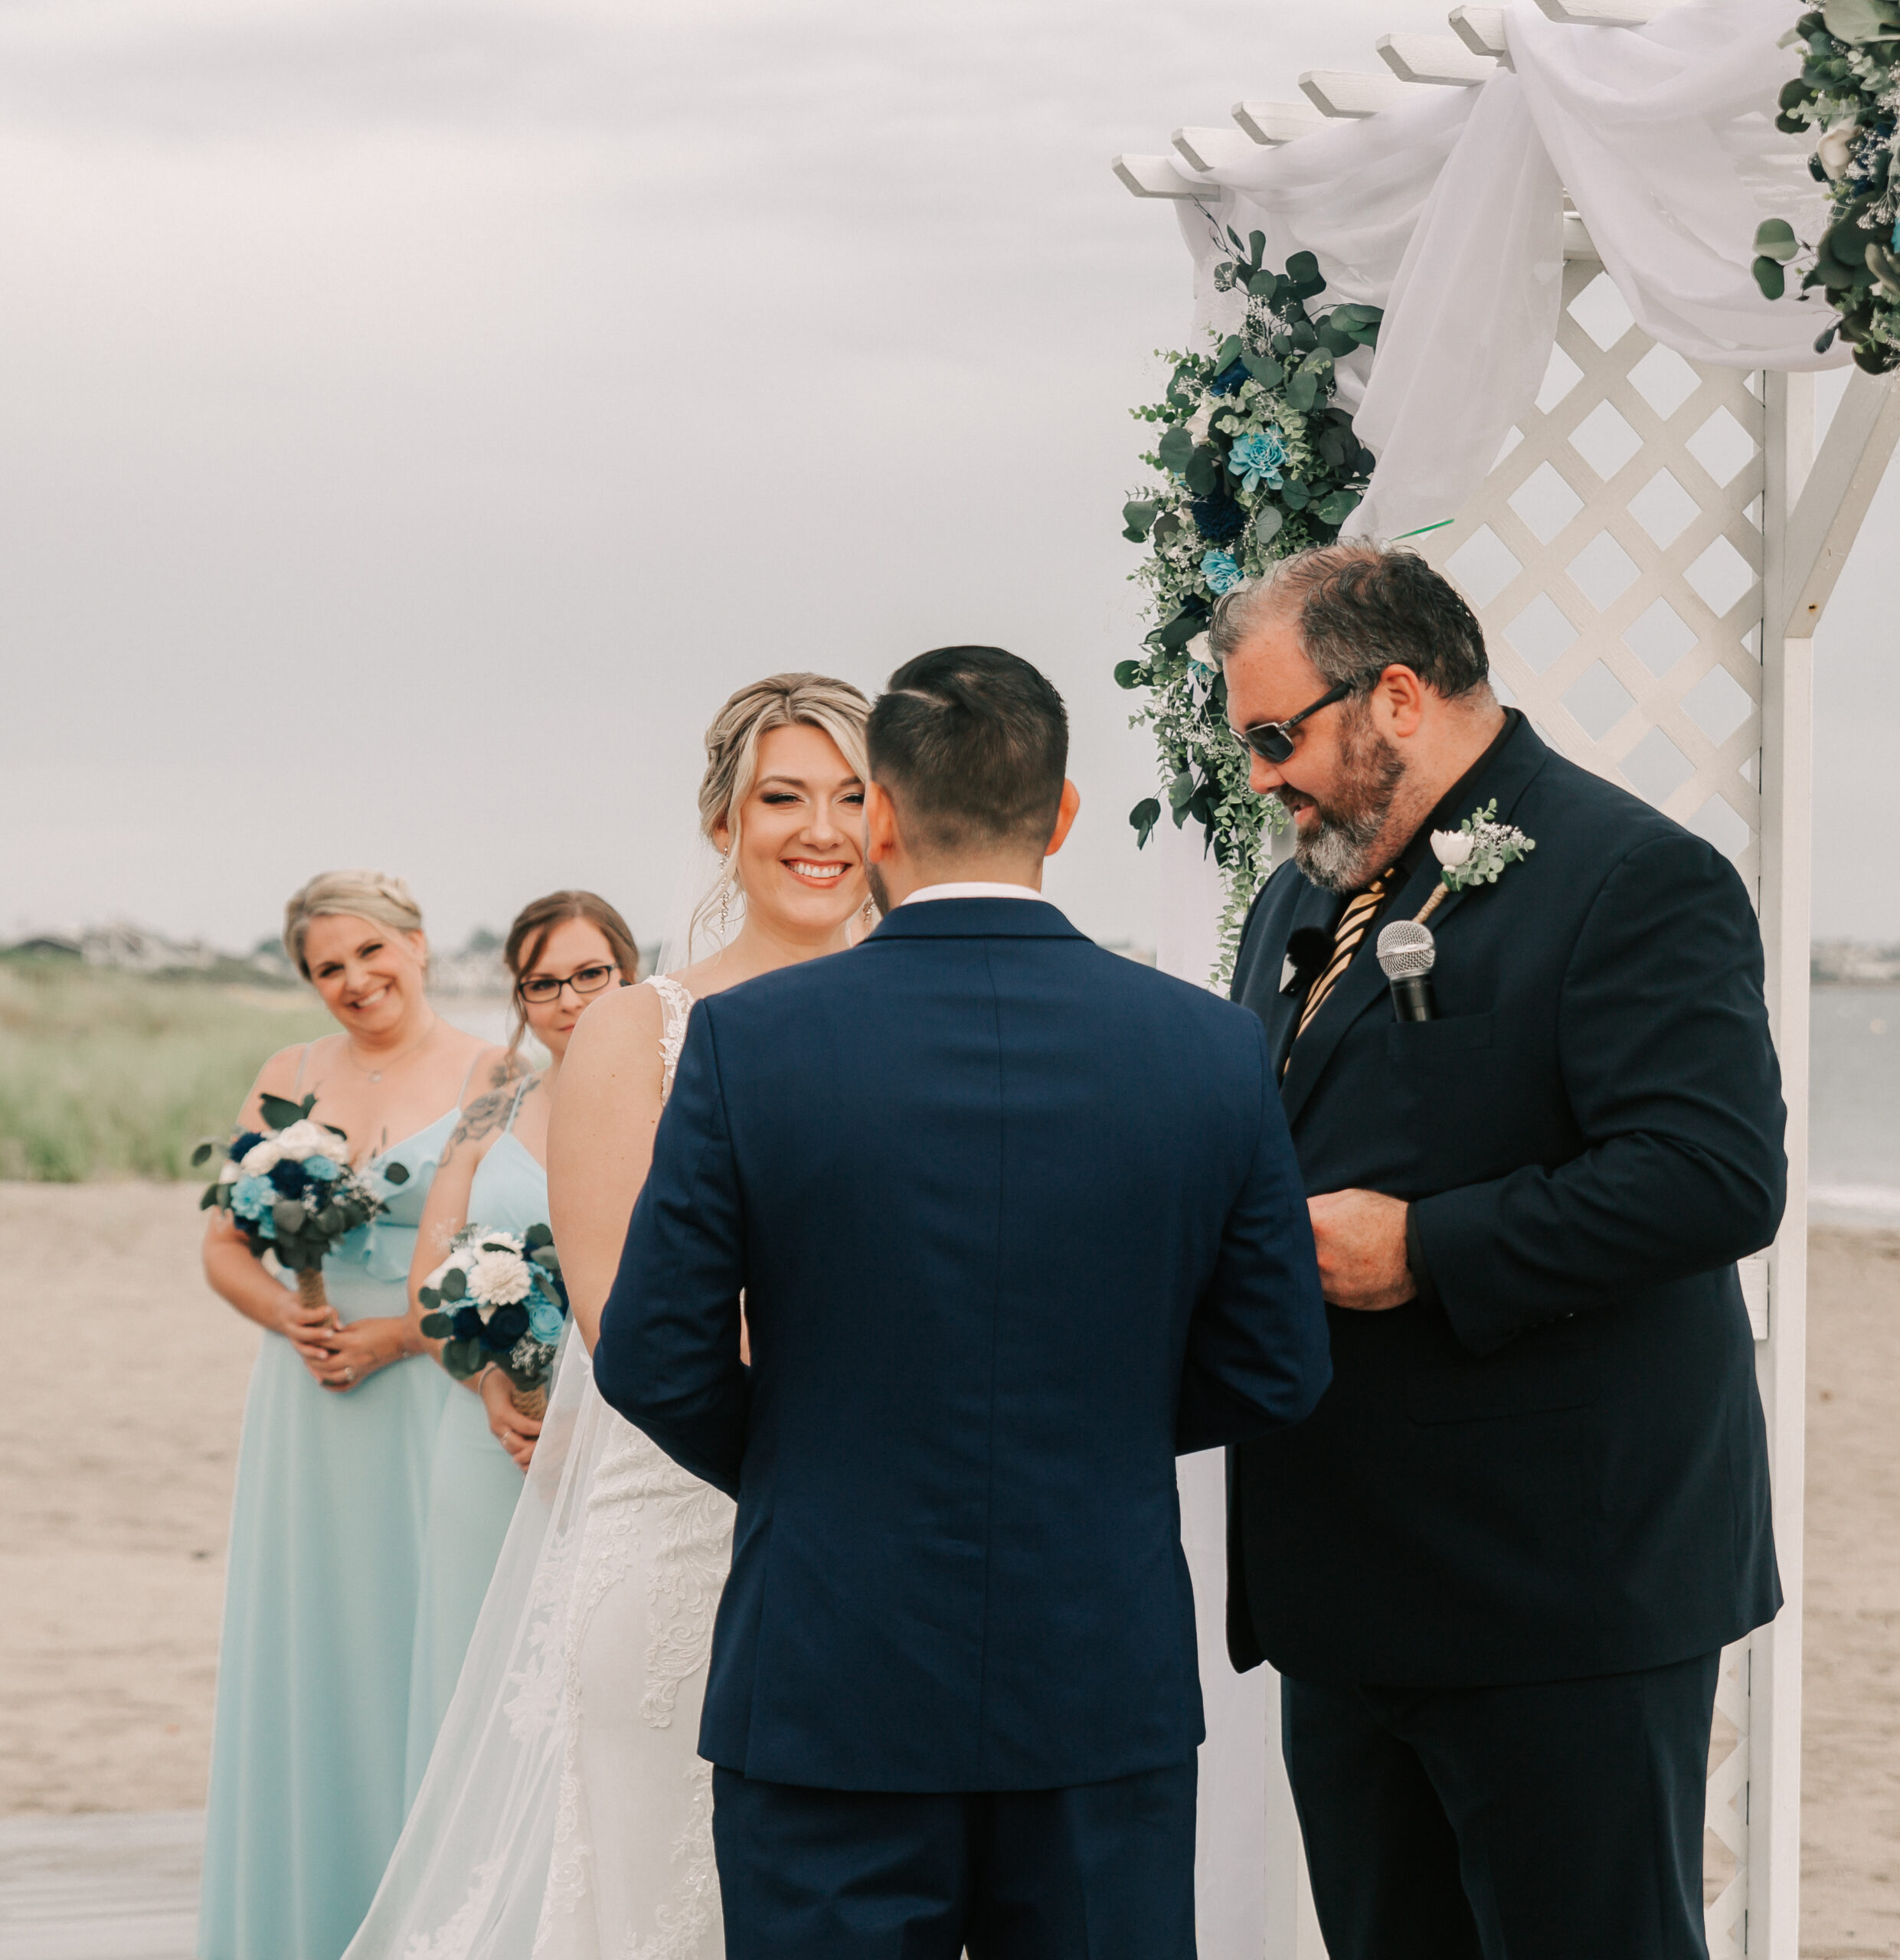 a couple getting married on the beach at Galilee Beach Club in Narragansett, RI - one of the most unique wedding venues in Rhode Island